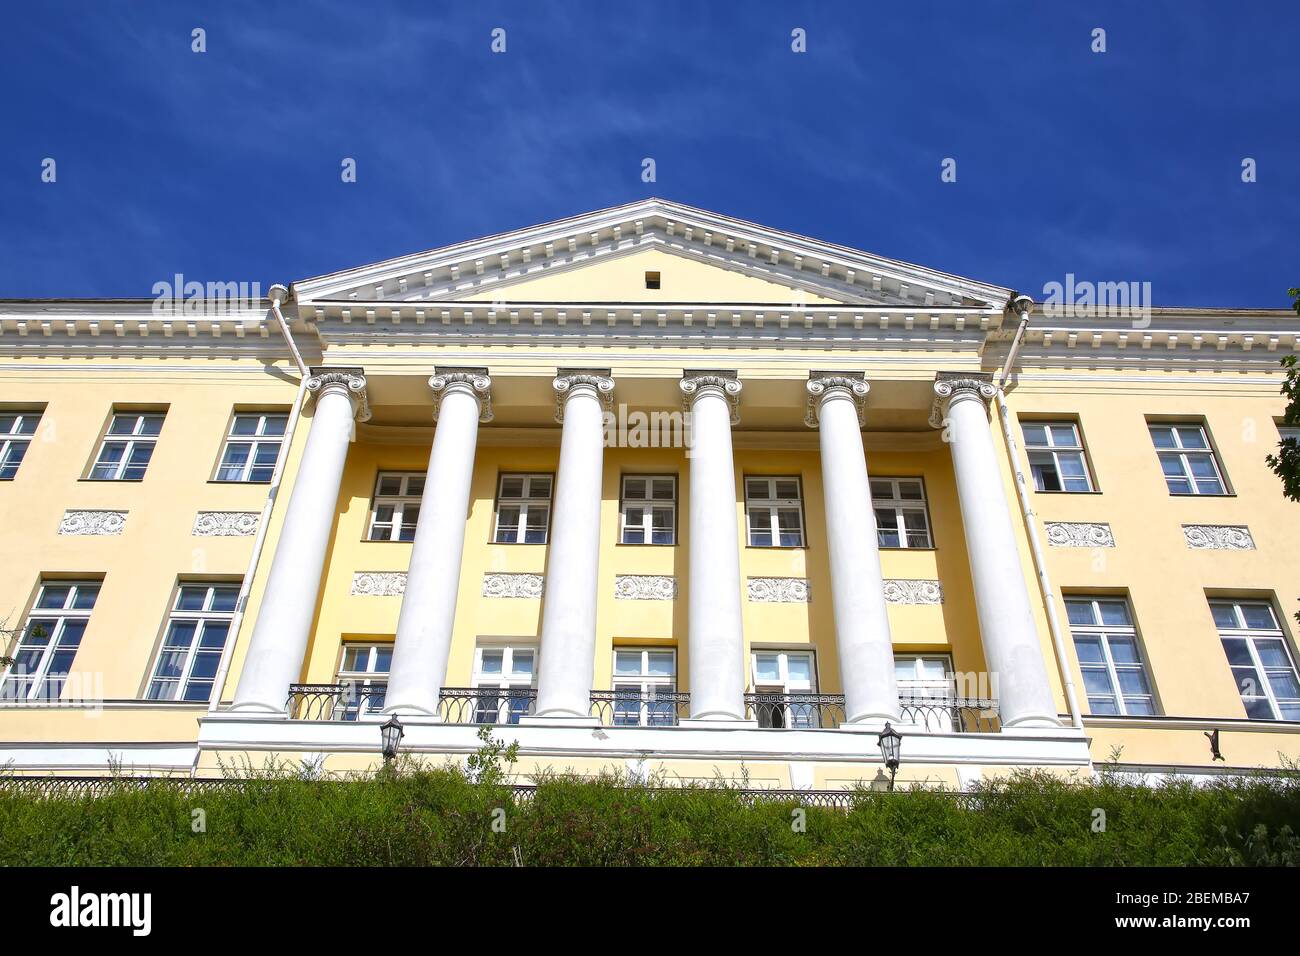 Historic building in the old town of Tallinn, Estonia. Painted yellow with columns on a beautiful day. Stock Photo